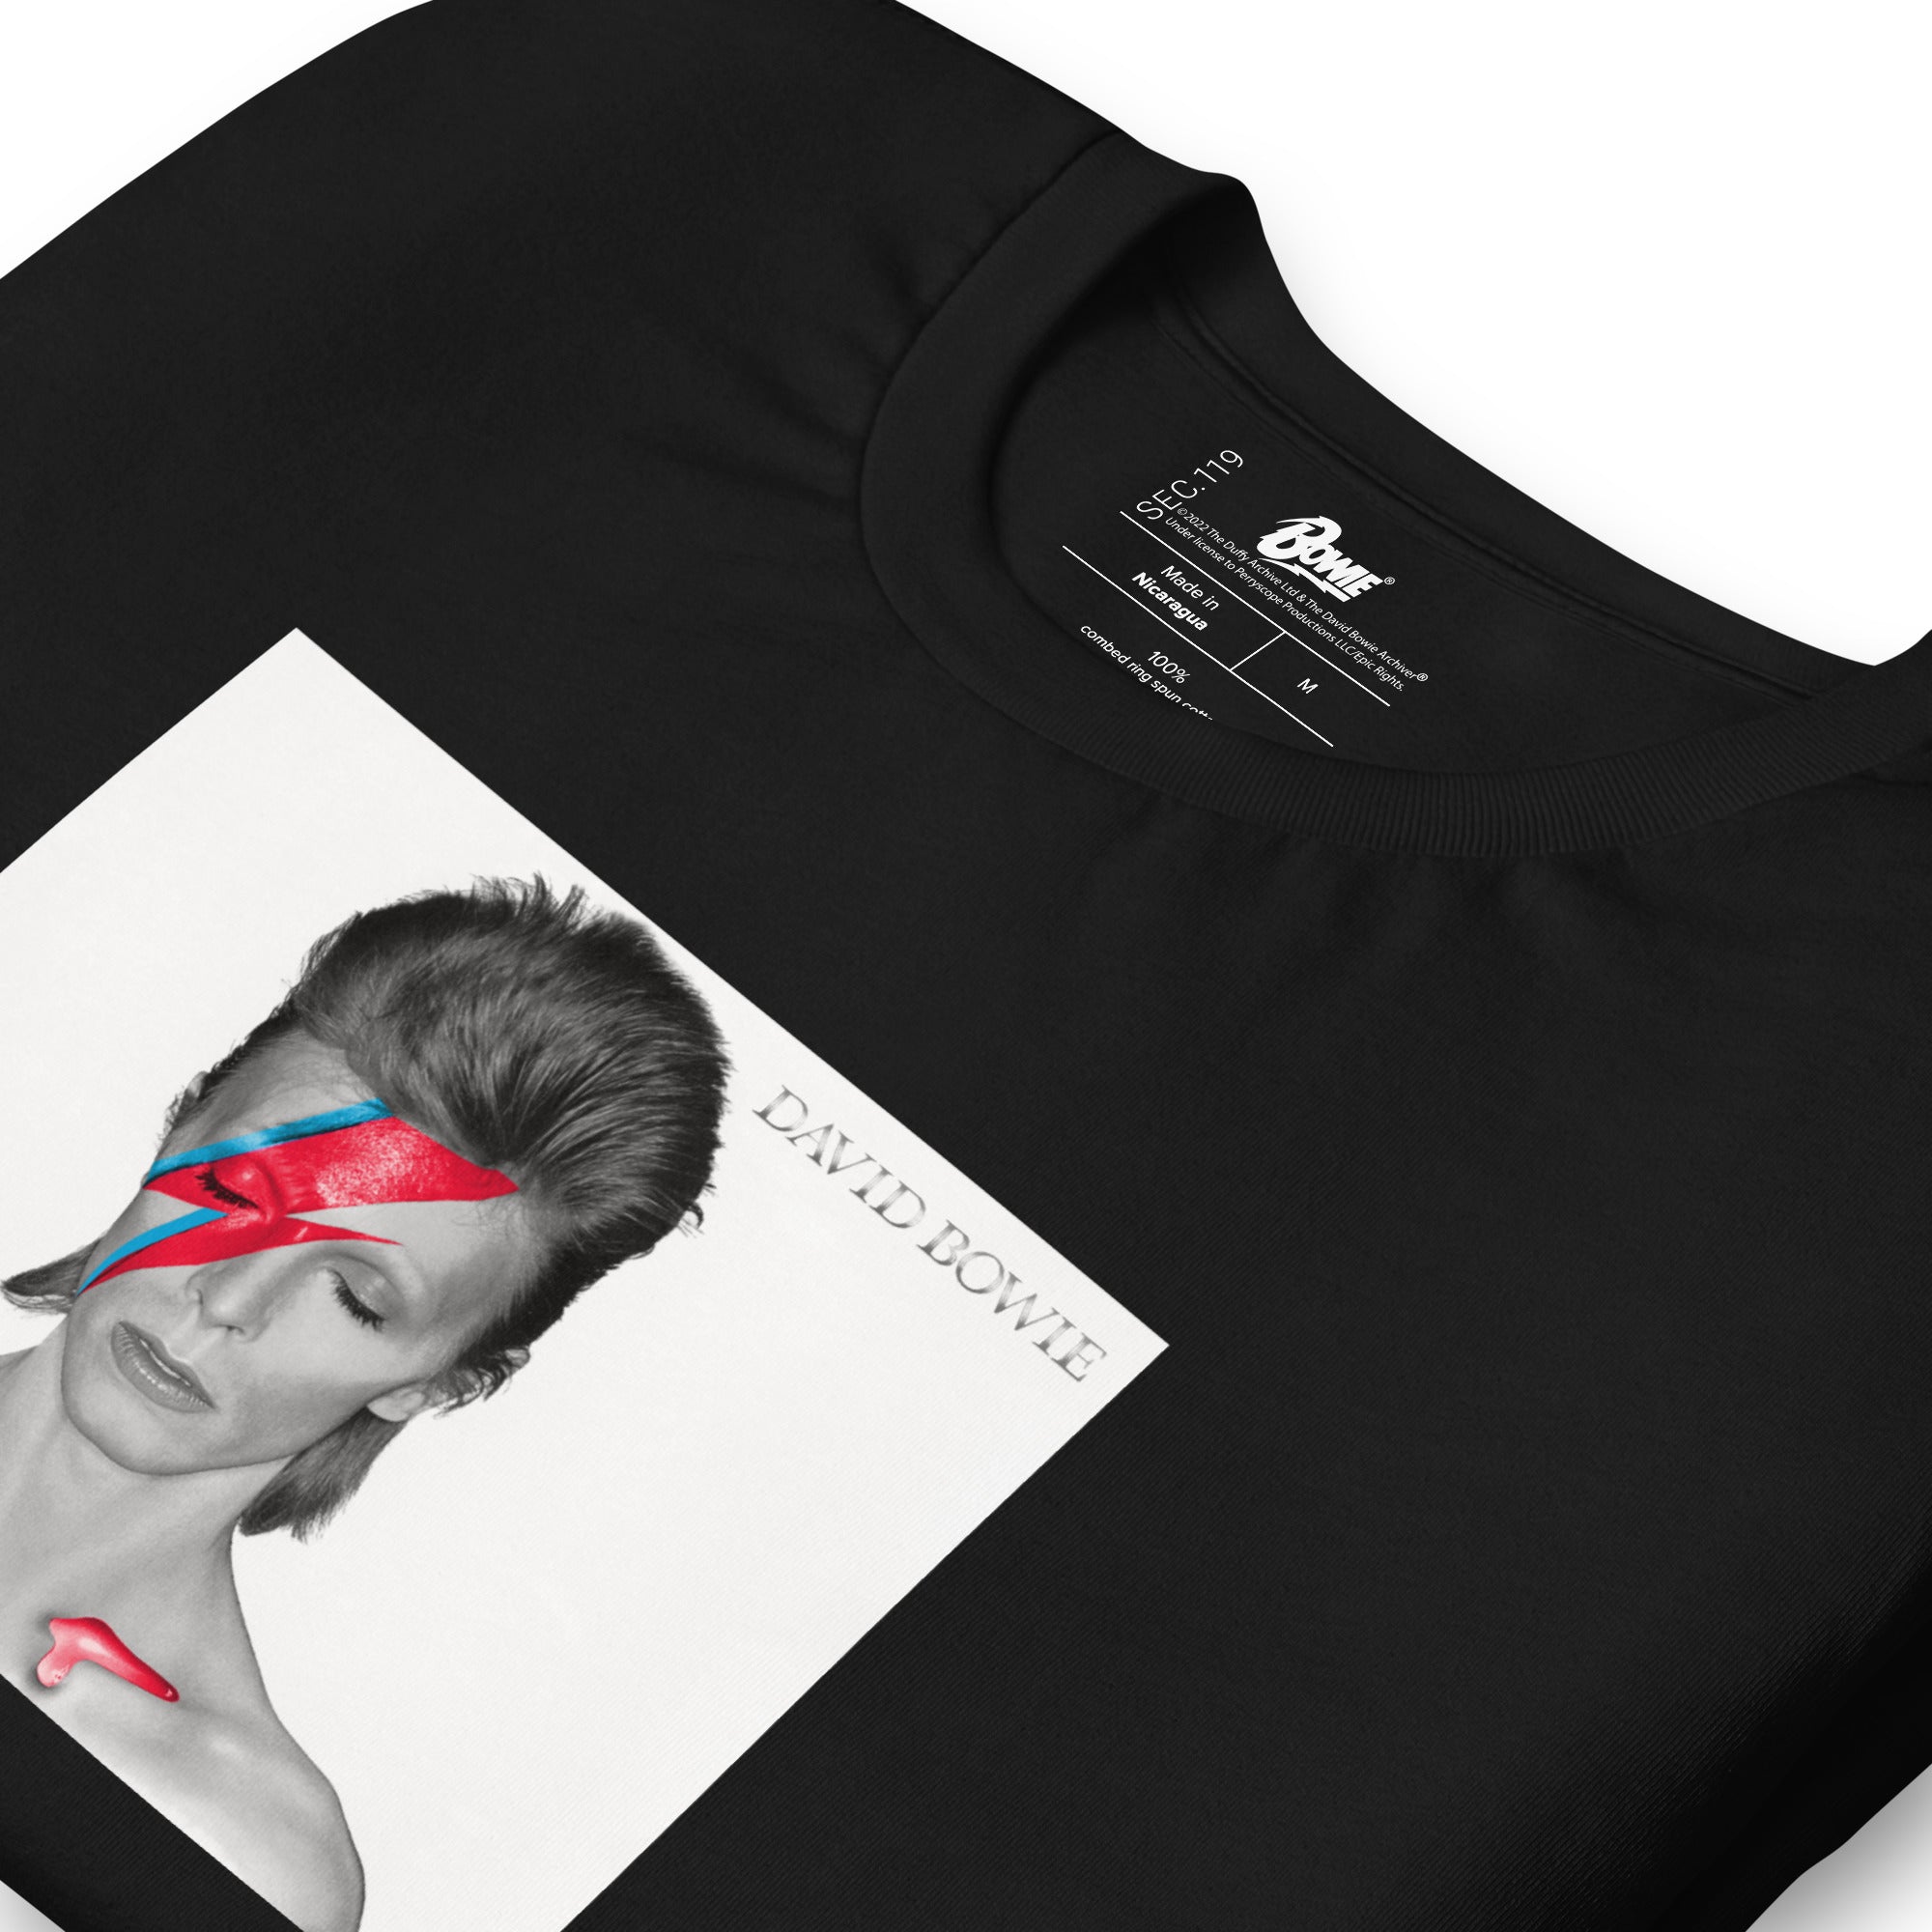 David Bowie Bolt Face Tee - Section 119